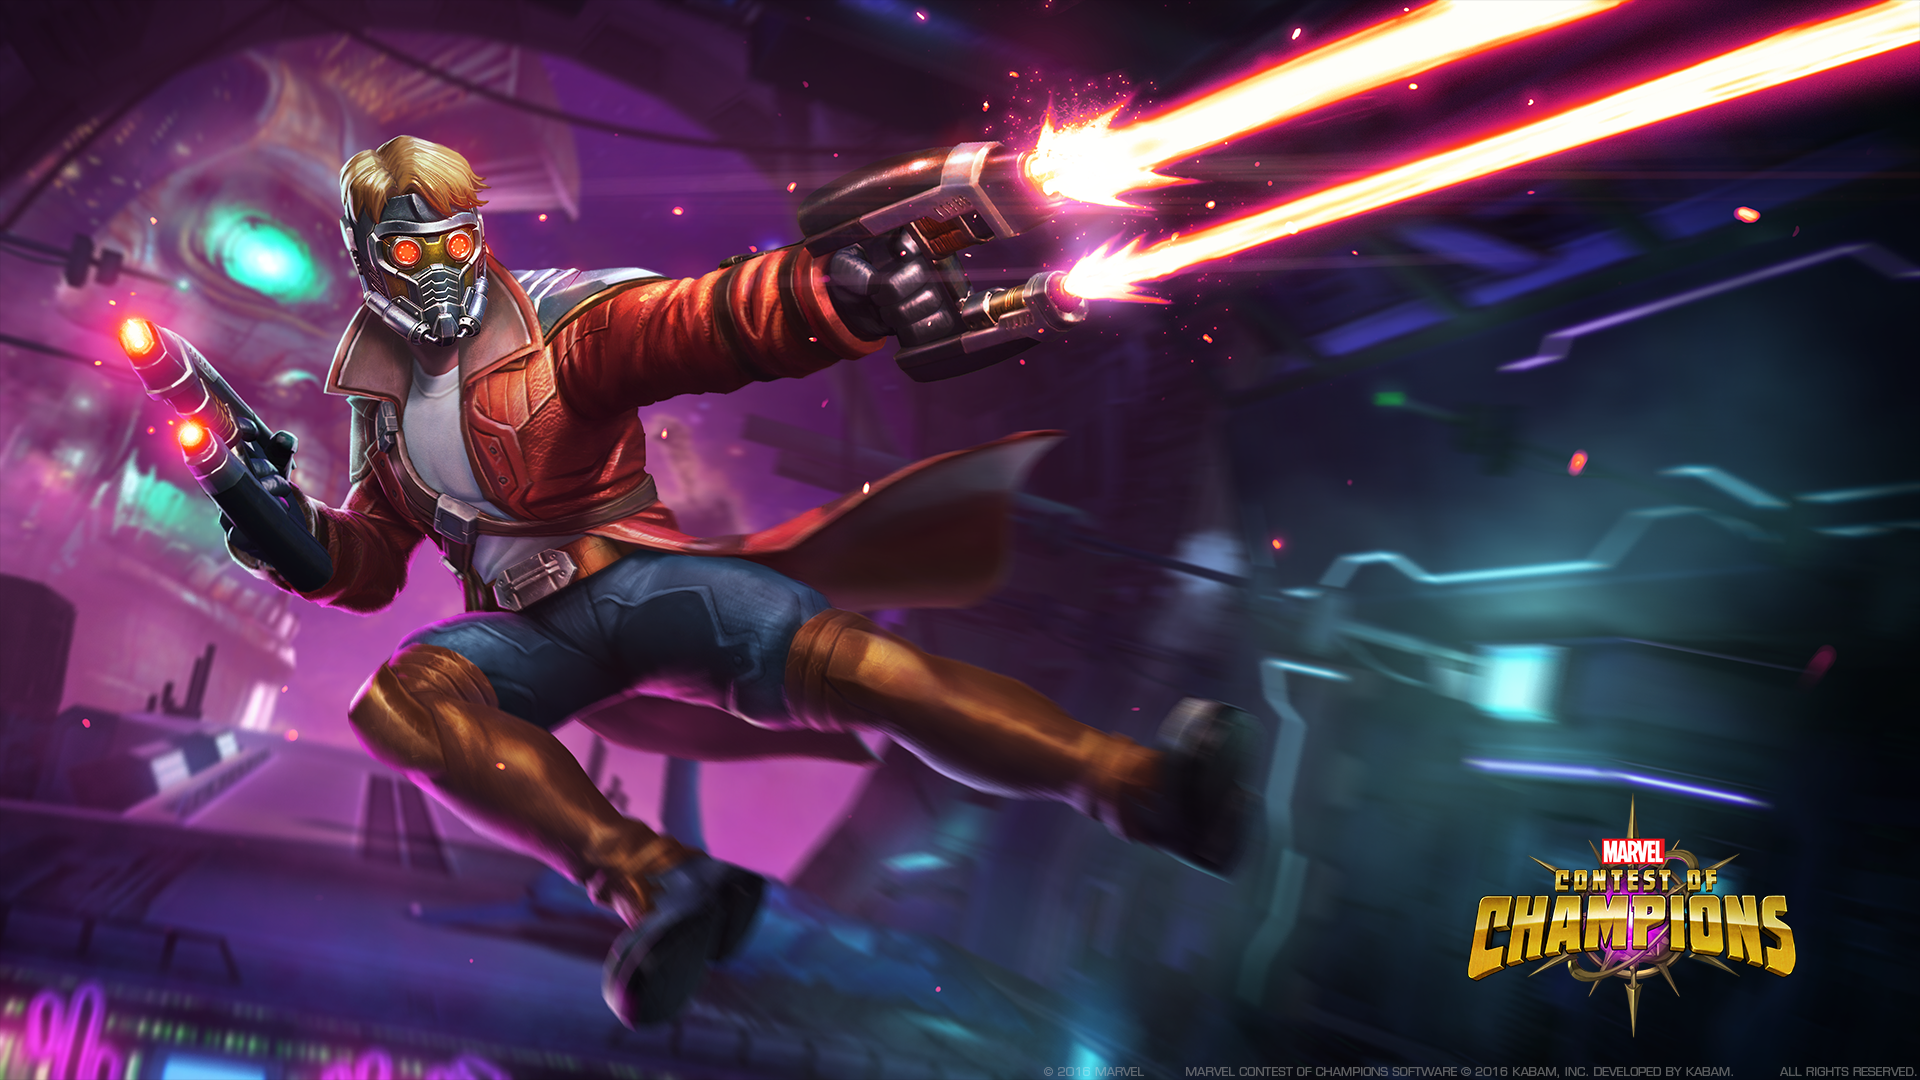 Video Game MARVEL Contest of Champions Star Lord Wallpaper. Contest of champions, Marvel puzzle quest, Background image